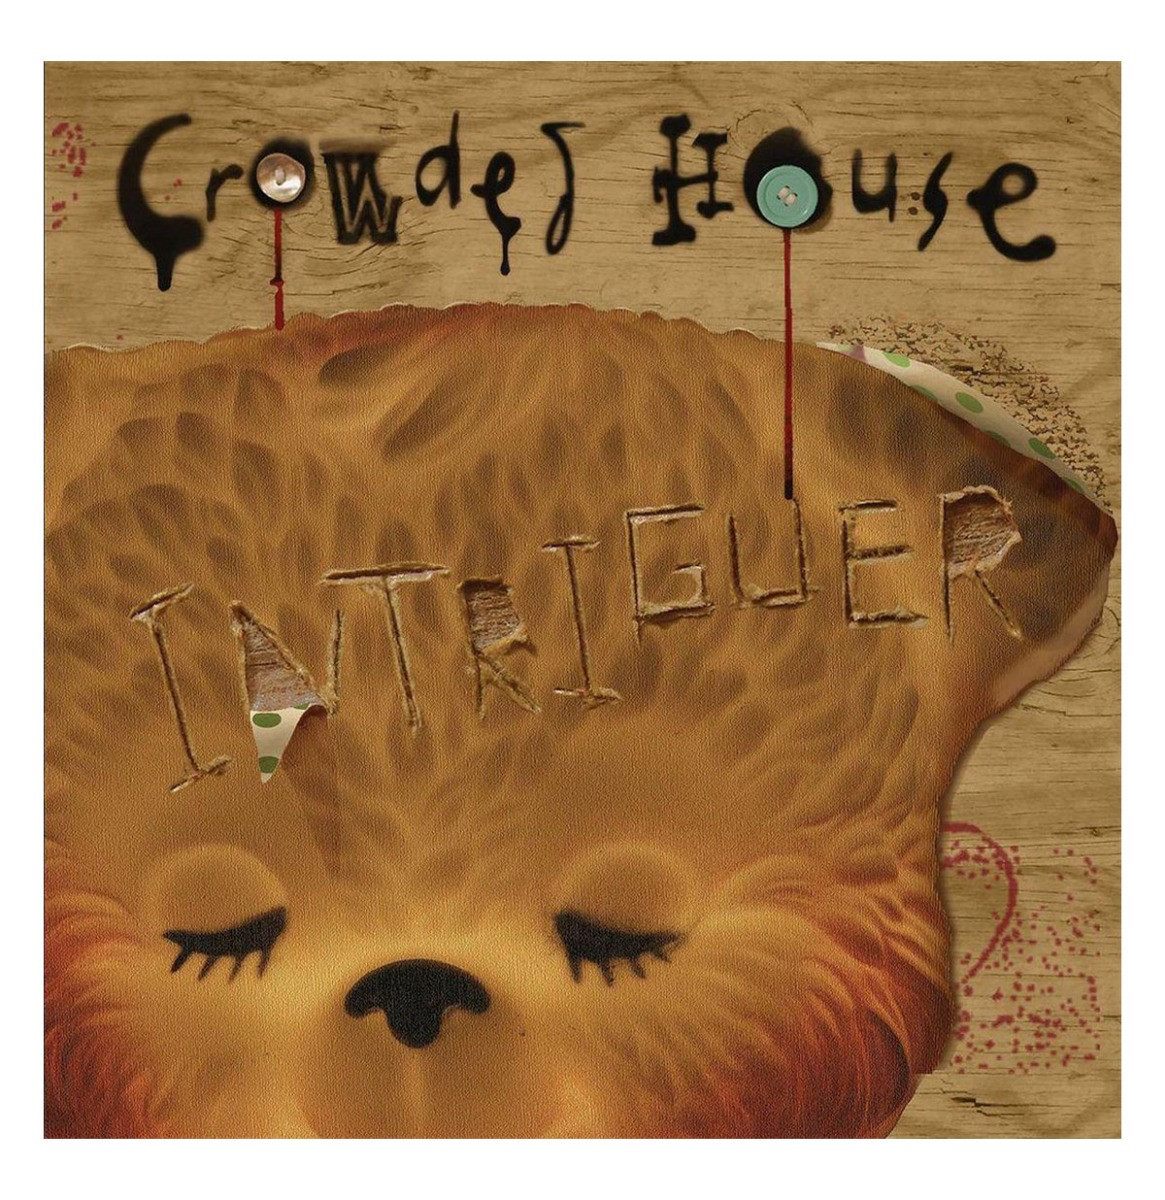 Crowded House Intriguer - LP